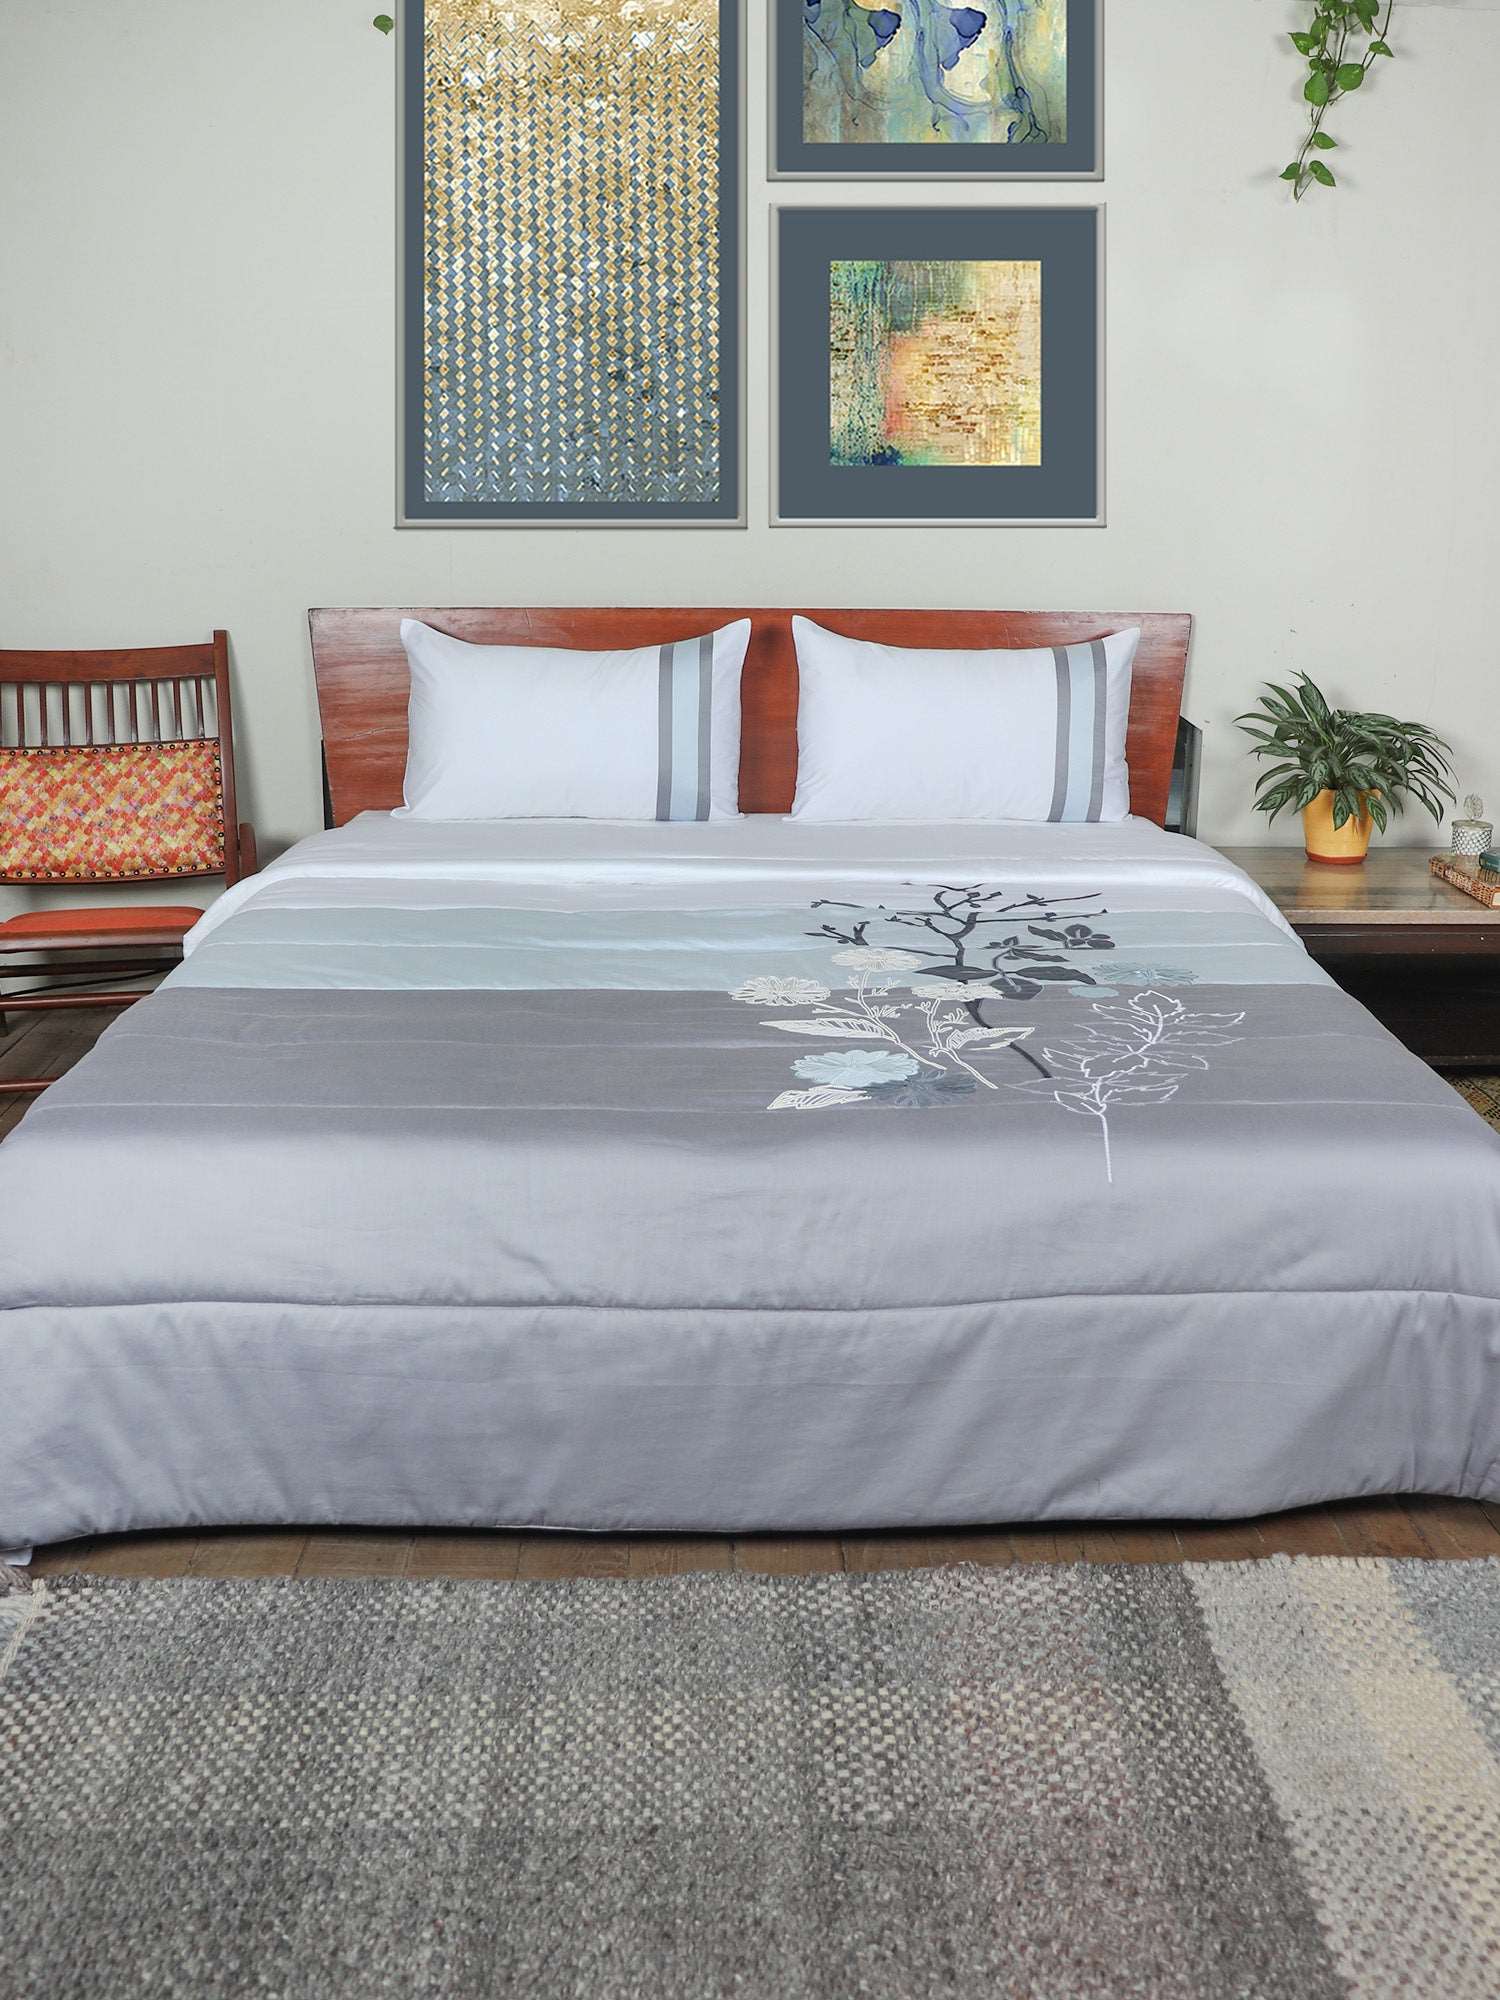 Quilt for Double Bed King Size | Floral Hand Embroidery with Applique | AC Comforter/Blanket/Duvet, Lightweight | 100% Cotton 300TC - Blue/Grey | 100x108+17x27 inches (254x274 cms)